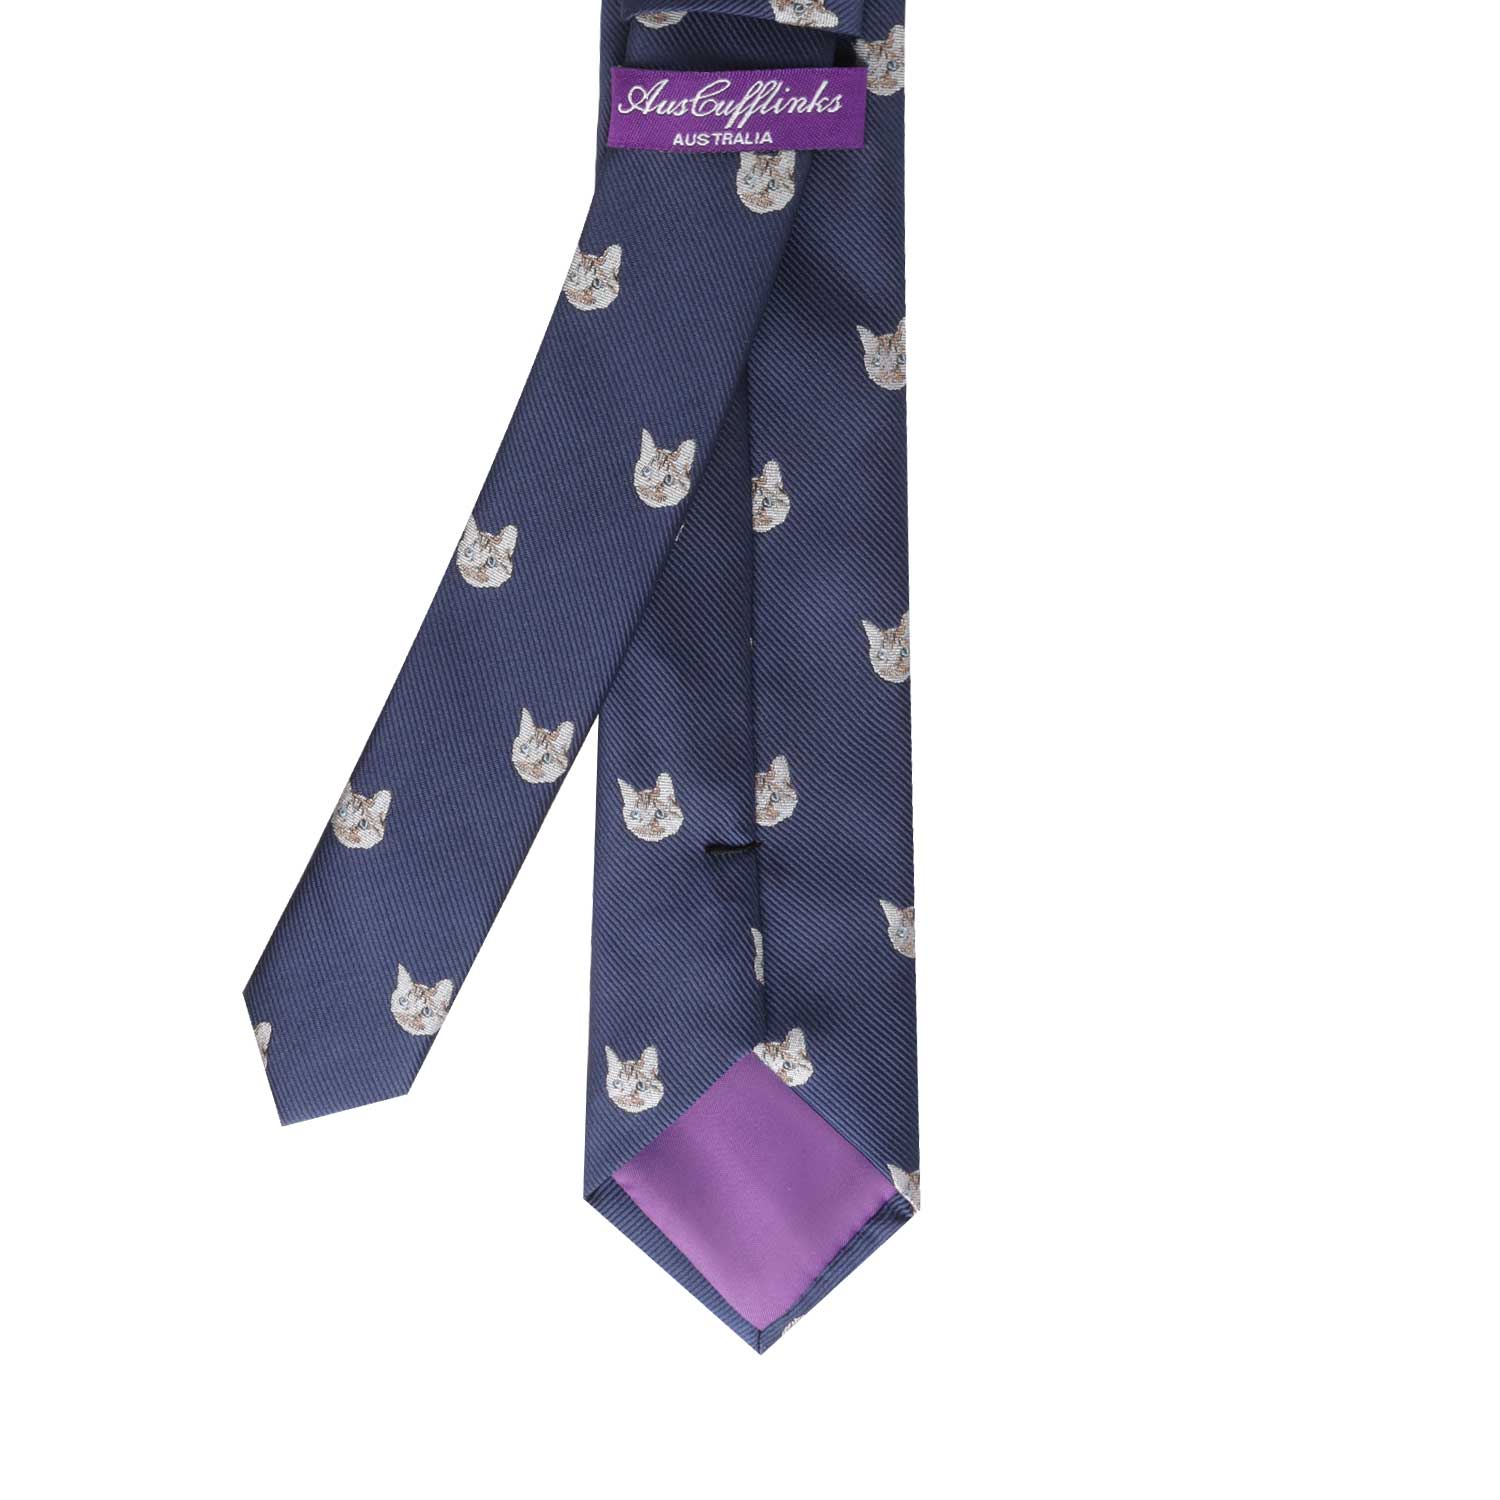 A Cat Skinny Tie with a cat print on it.